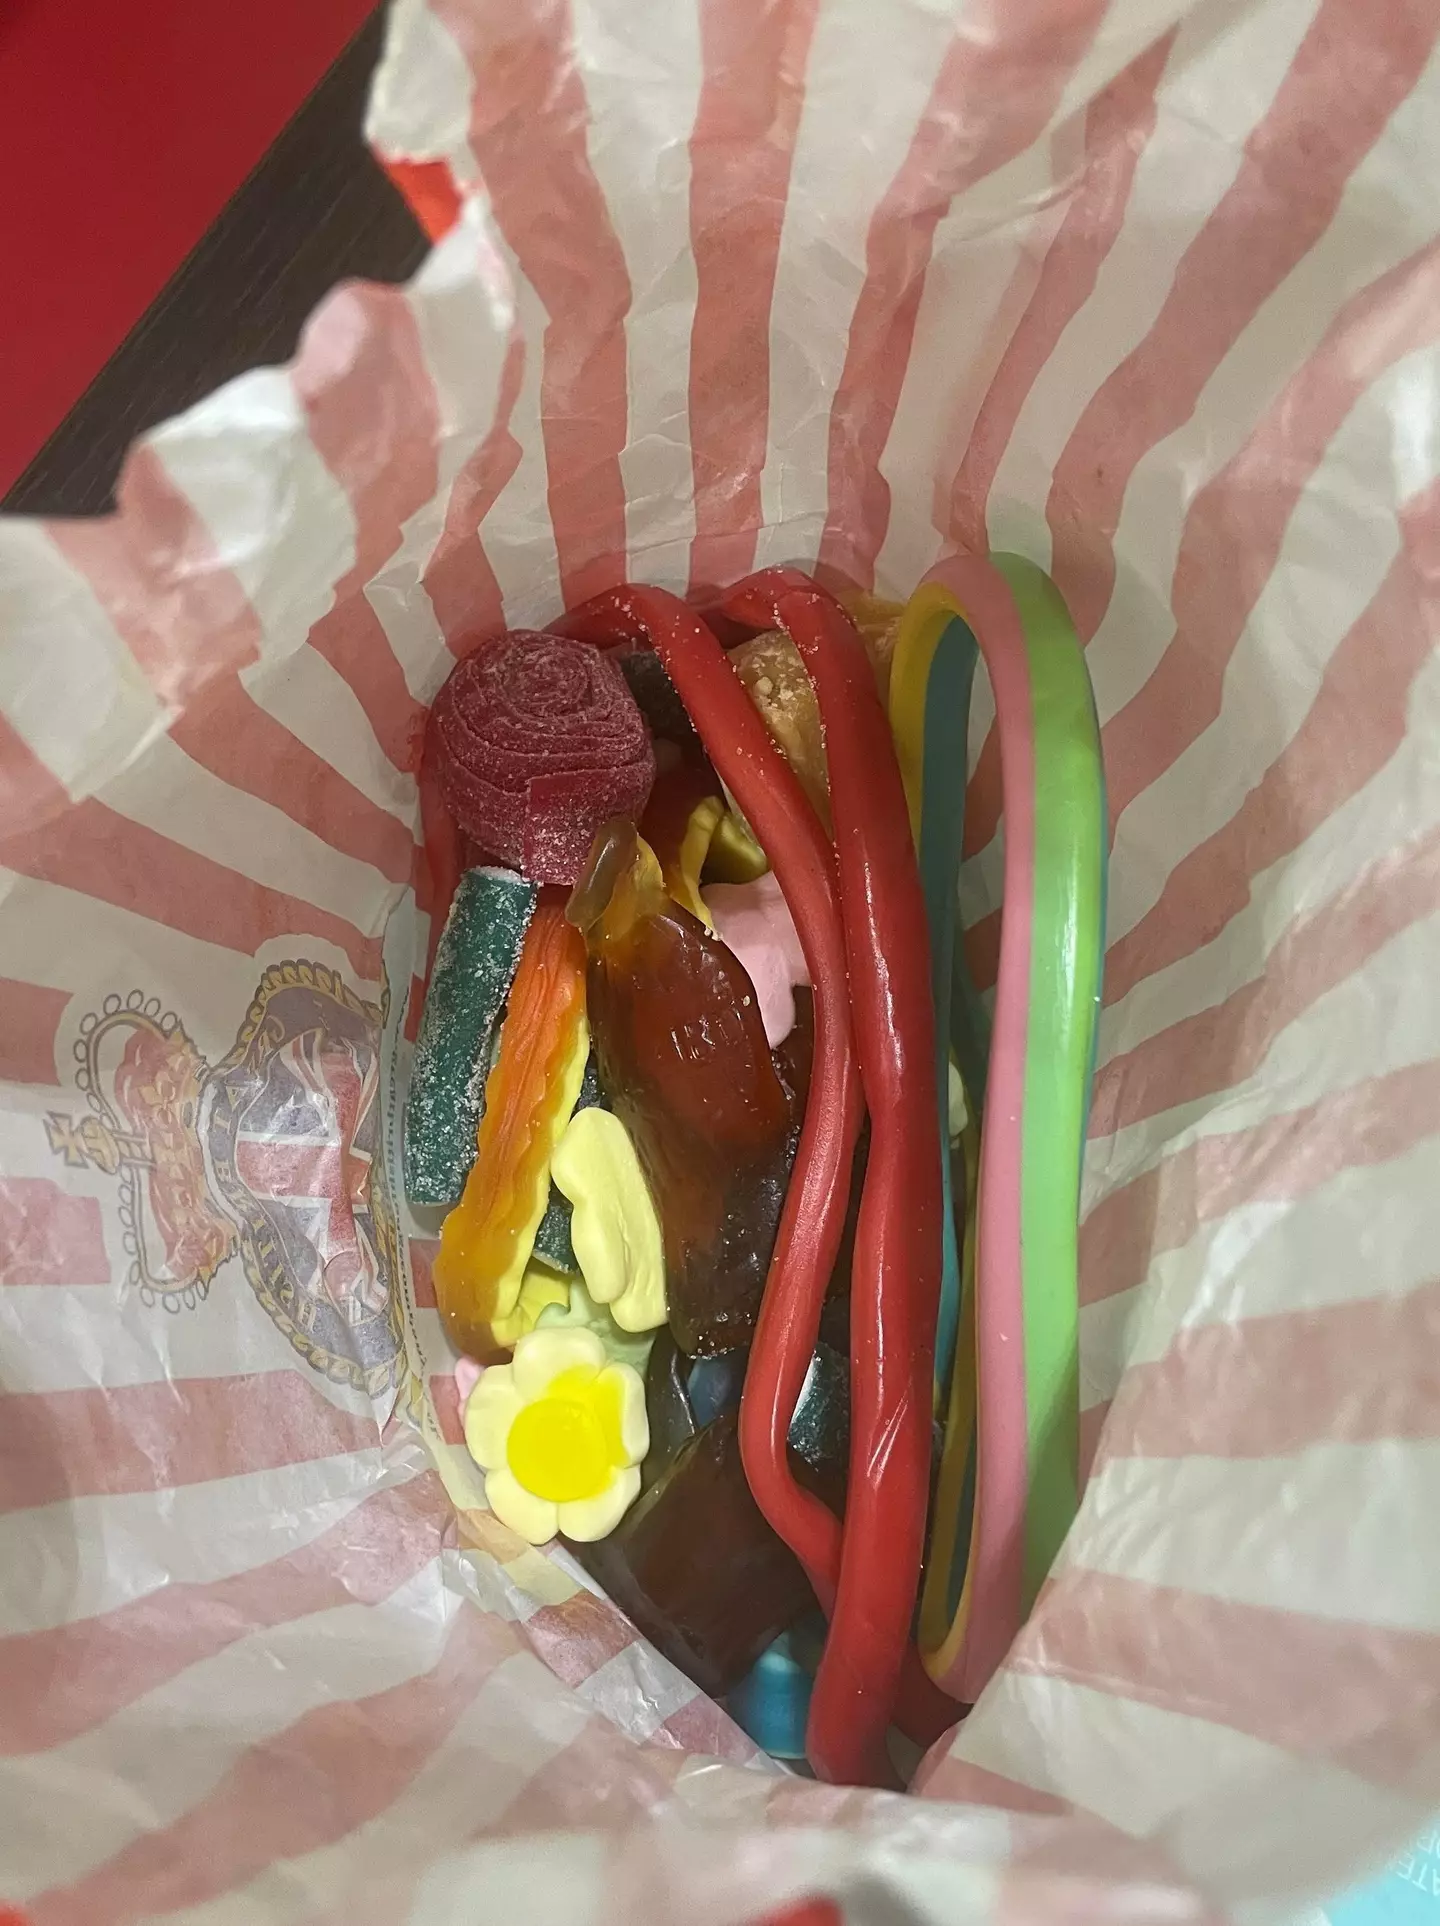 Rhiannon paid £47 for two bags of sweets.